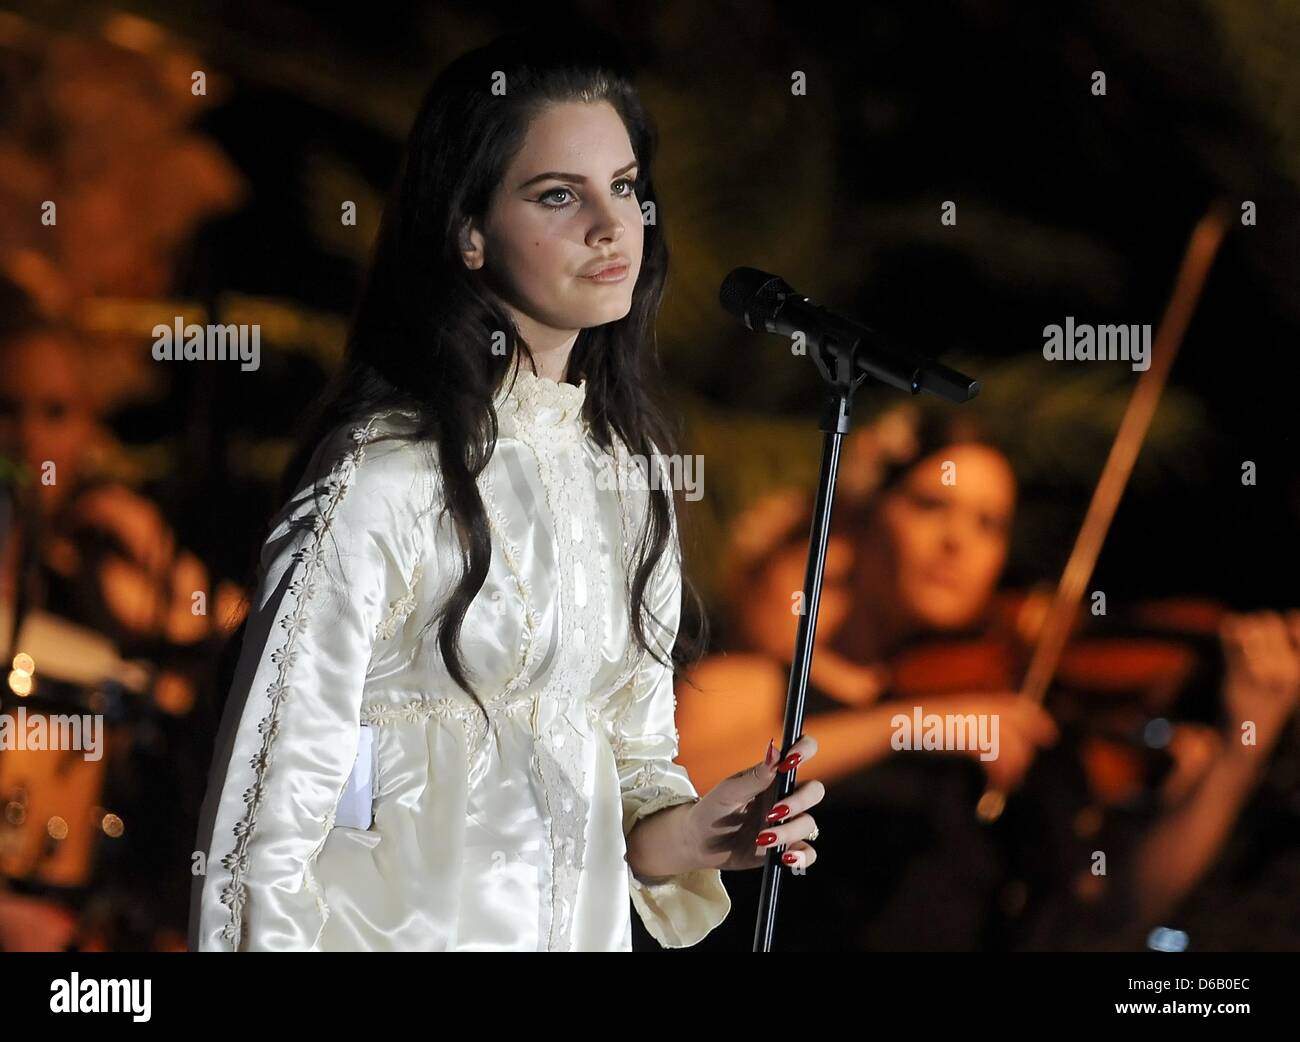 Berlin, Germany, 15 April 2013. US-American singer Lana Del Rey sings on stage at the Velodrom in Berlin, Germany, 15 April 2013. Photo: BRITTA PEDERSEN/DPA/Alamy Live News Stock Photo